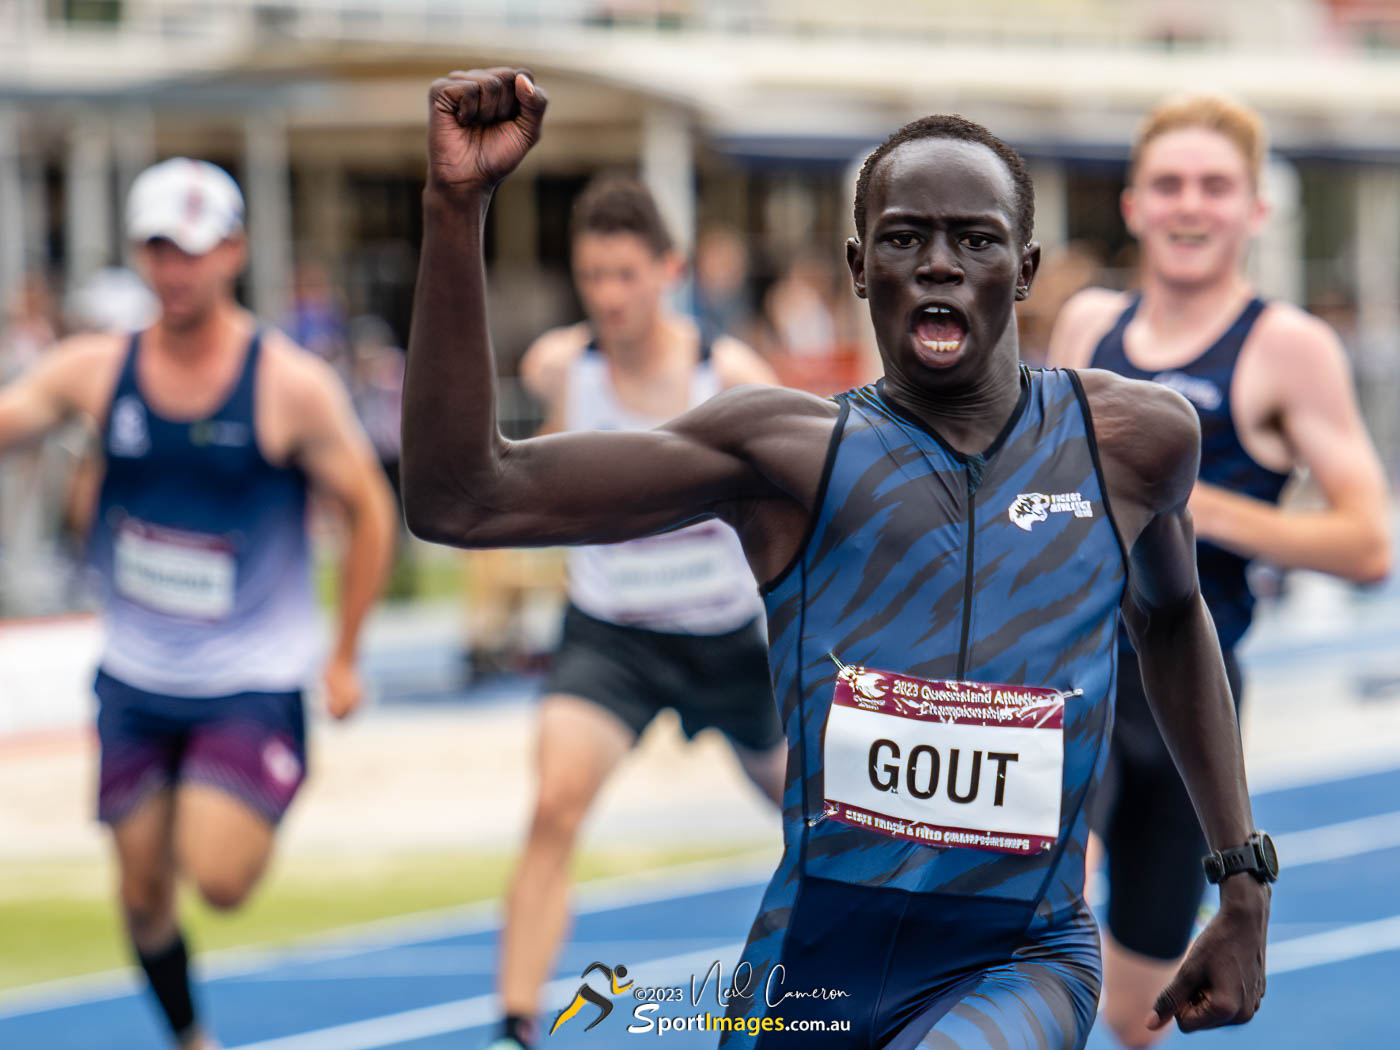 Gout Gout after breaking the Qld U18 100m record in 10.43 (0.5)